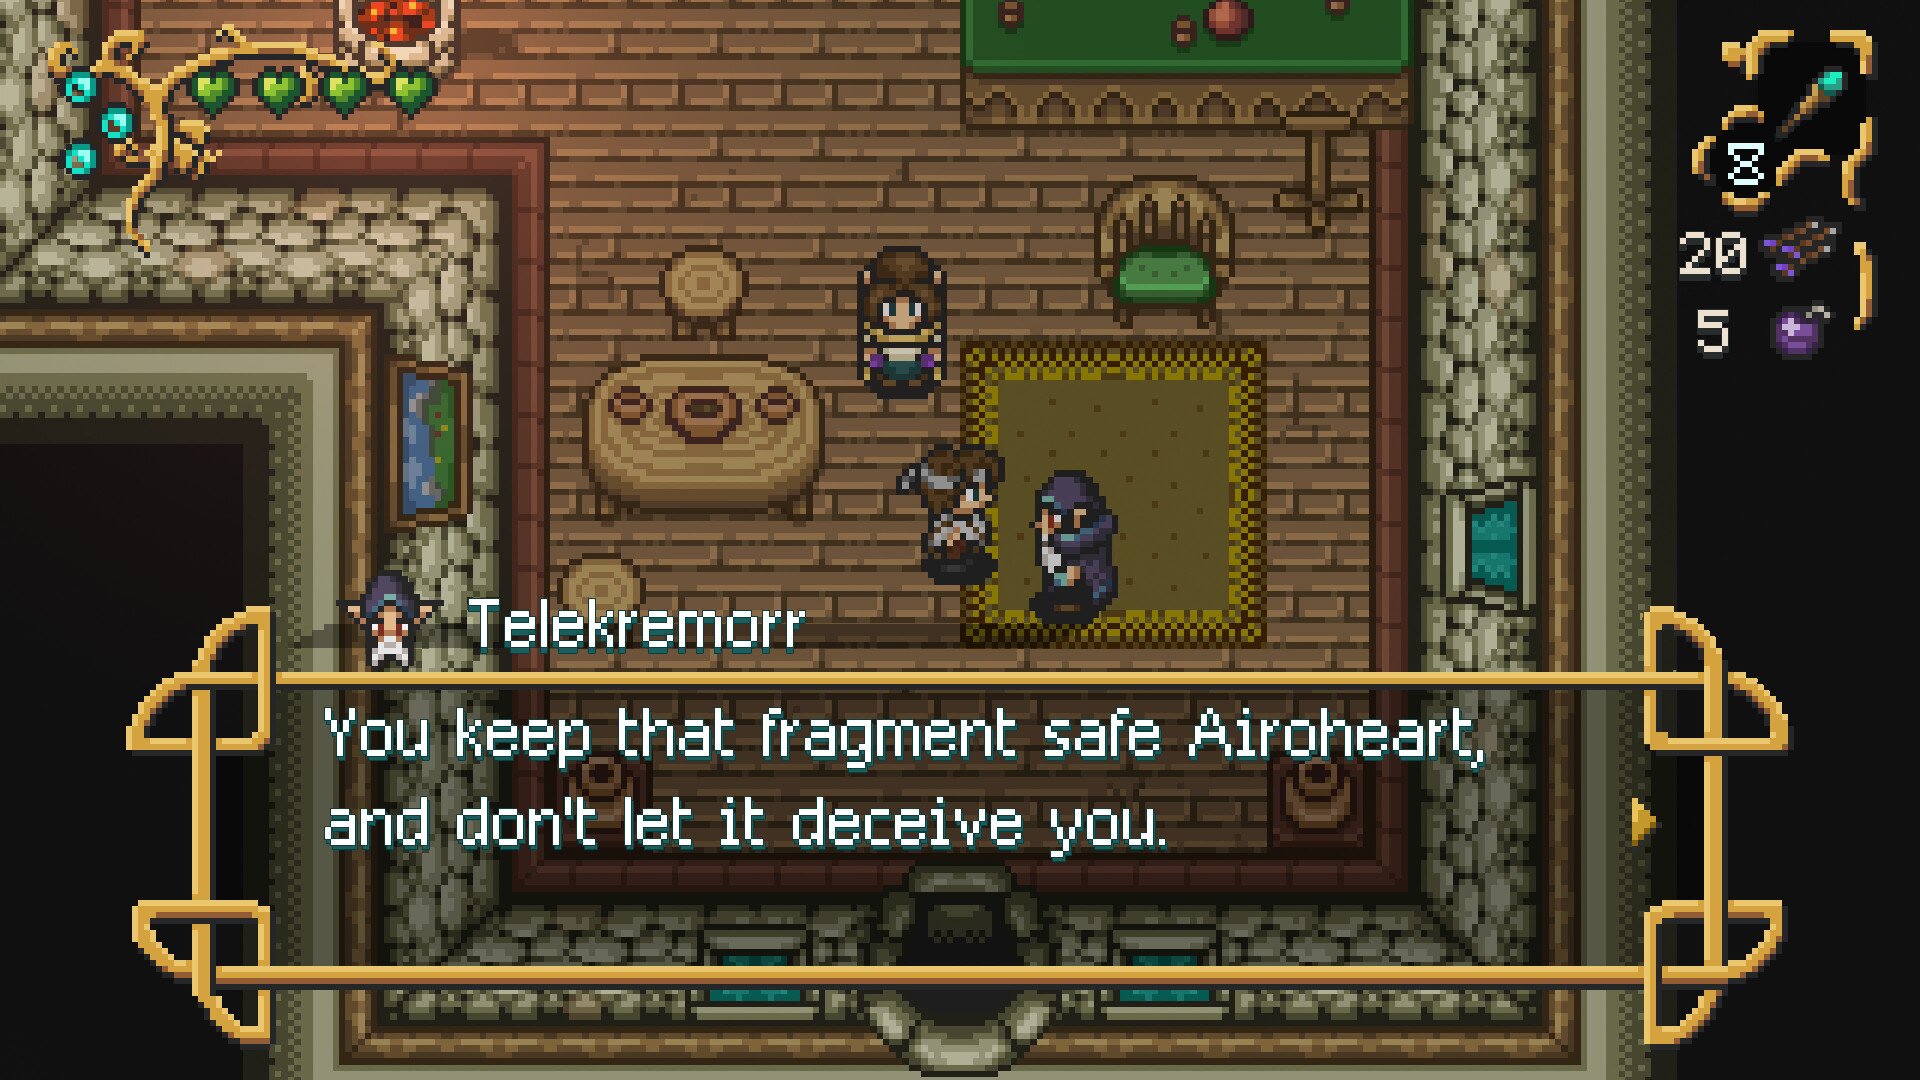 download the new for windows Airoheart